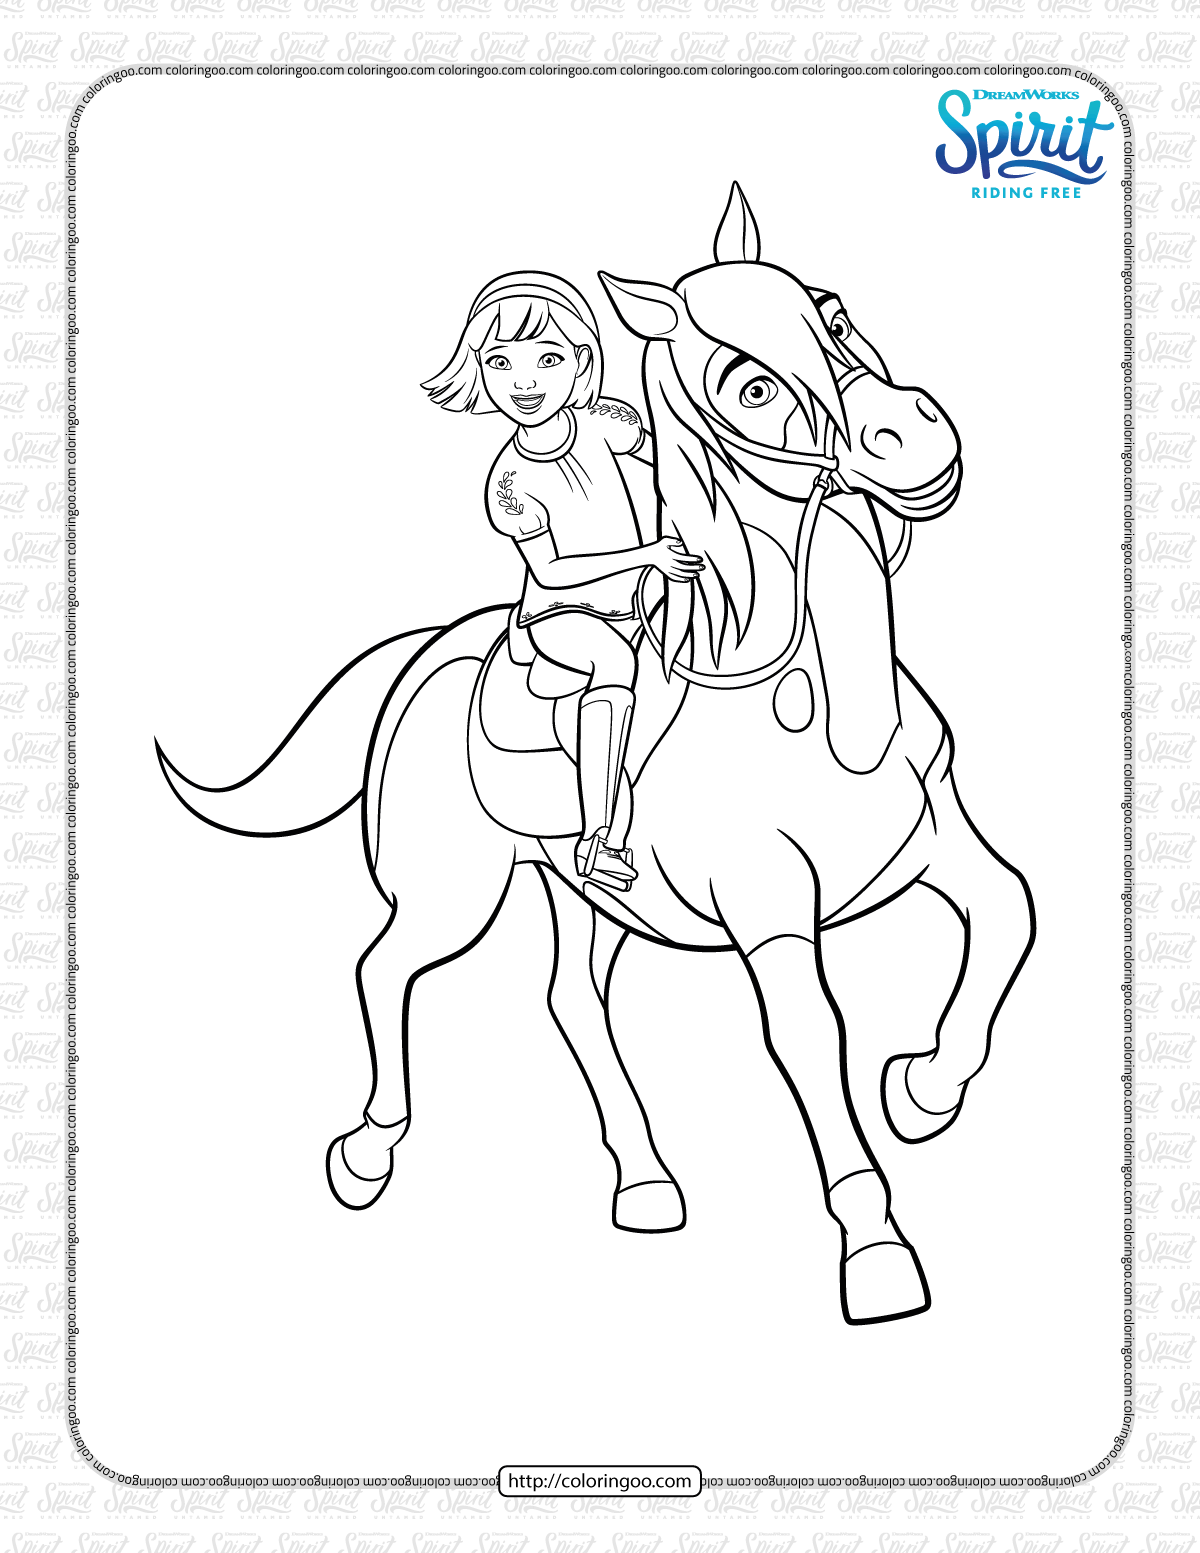 abigail and boomerang pdf coloring pages